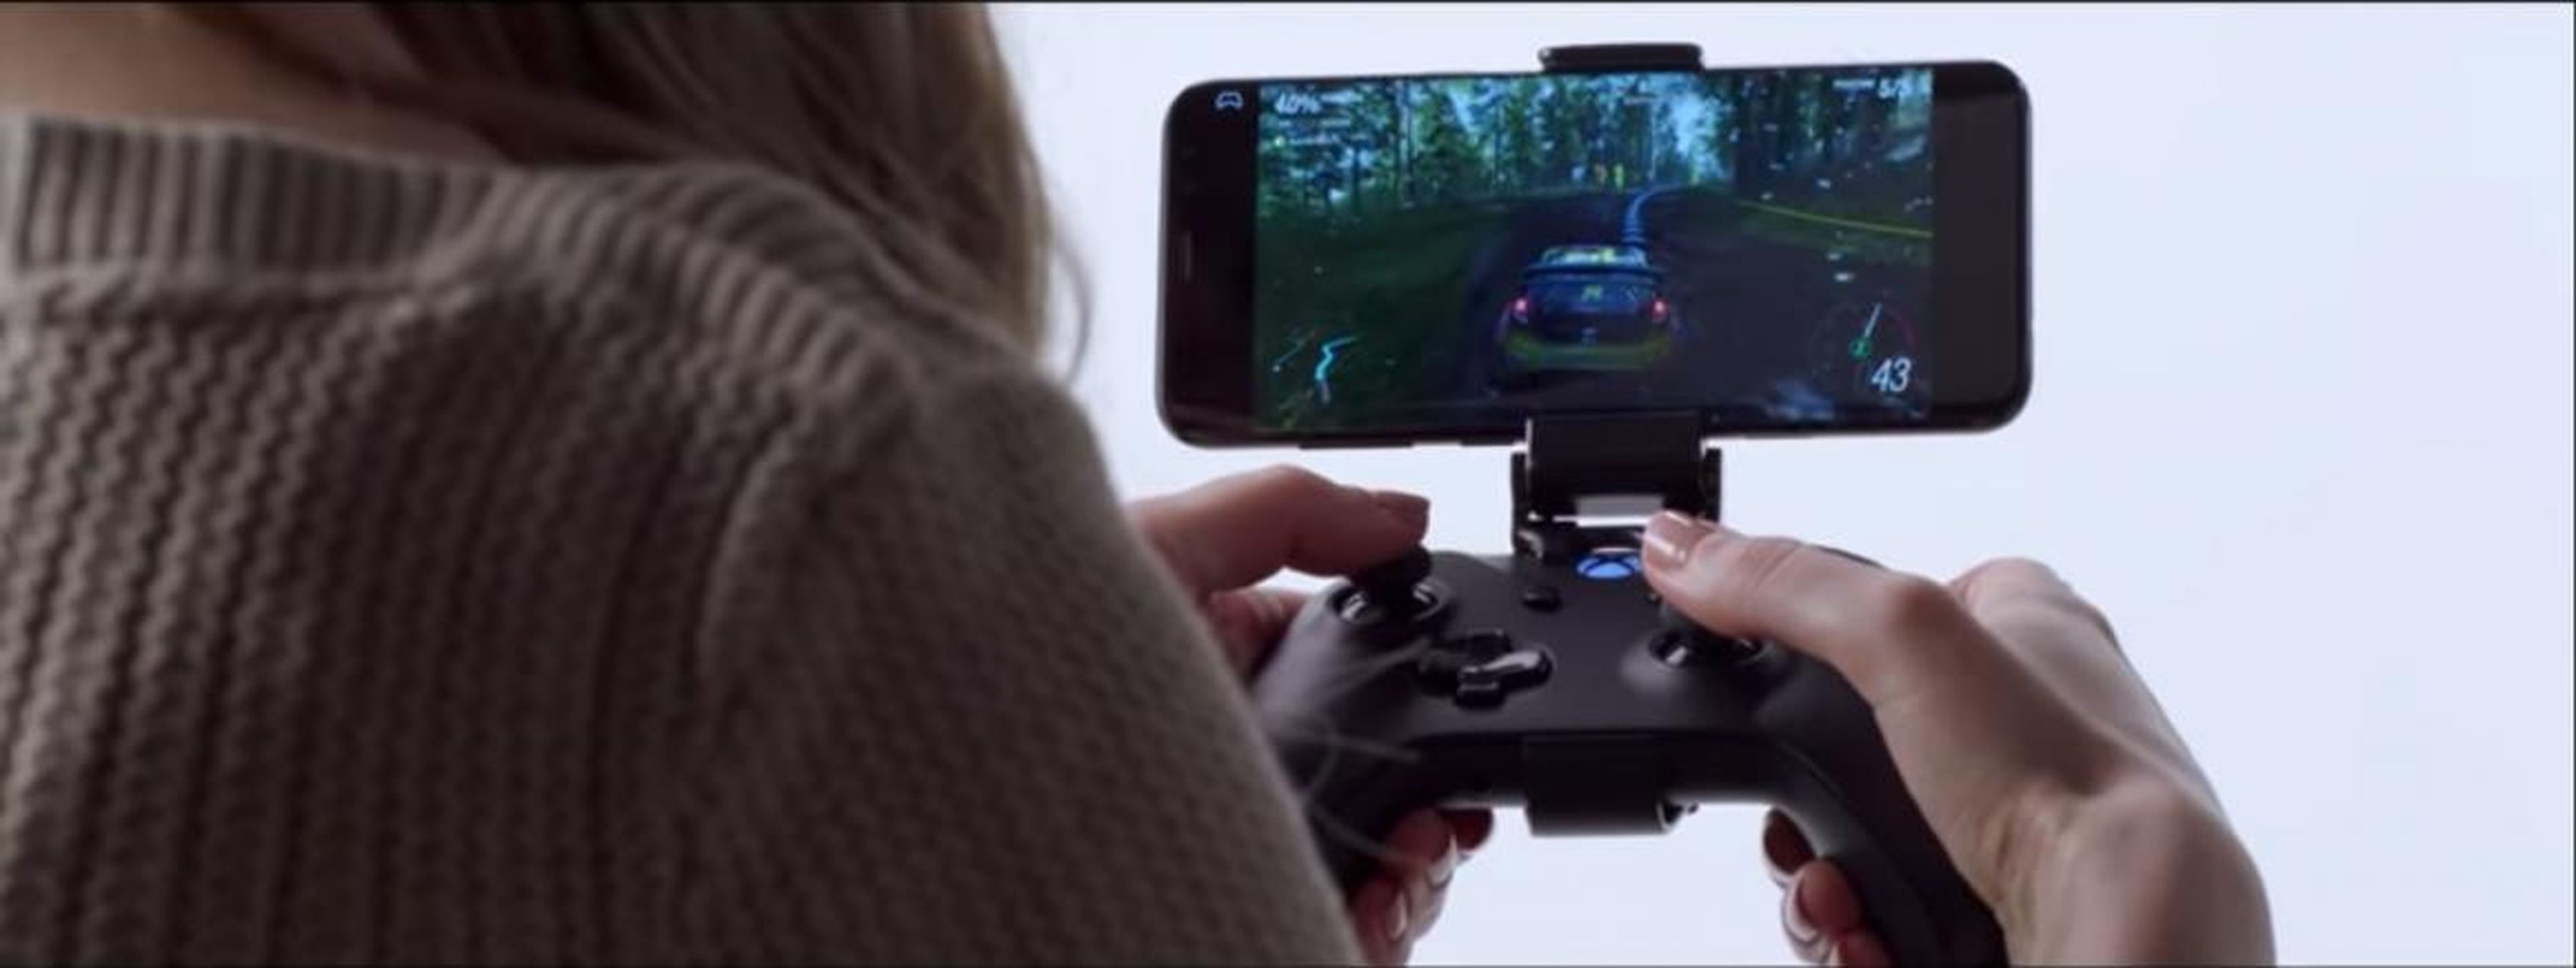 In one example Microsoft showed, a woman plays an Xbox game through Project xCloud on a smartphone connected to an Xbox One gamepad.